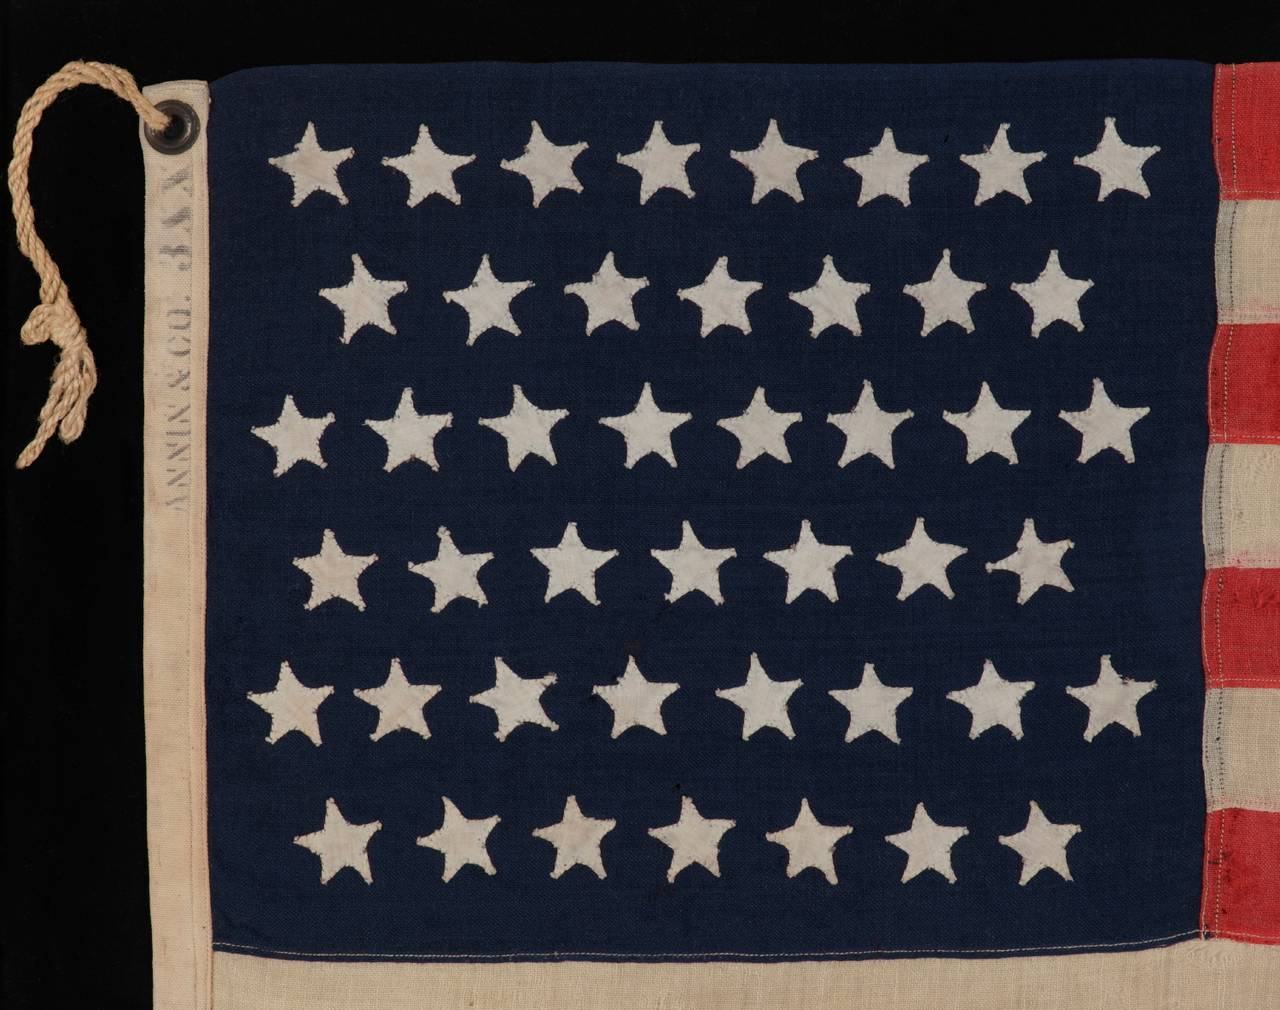 45 hand-sewn, single-appliqued stars on the smallest pieced-and-sewn, commercially-manufactured, wool flag that I have ever encountered in this period, 1896-1908 (Utah Statehood), made and signed by the Annin Company in New York City:

45 star